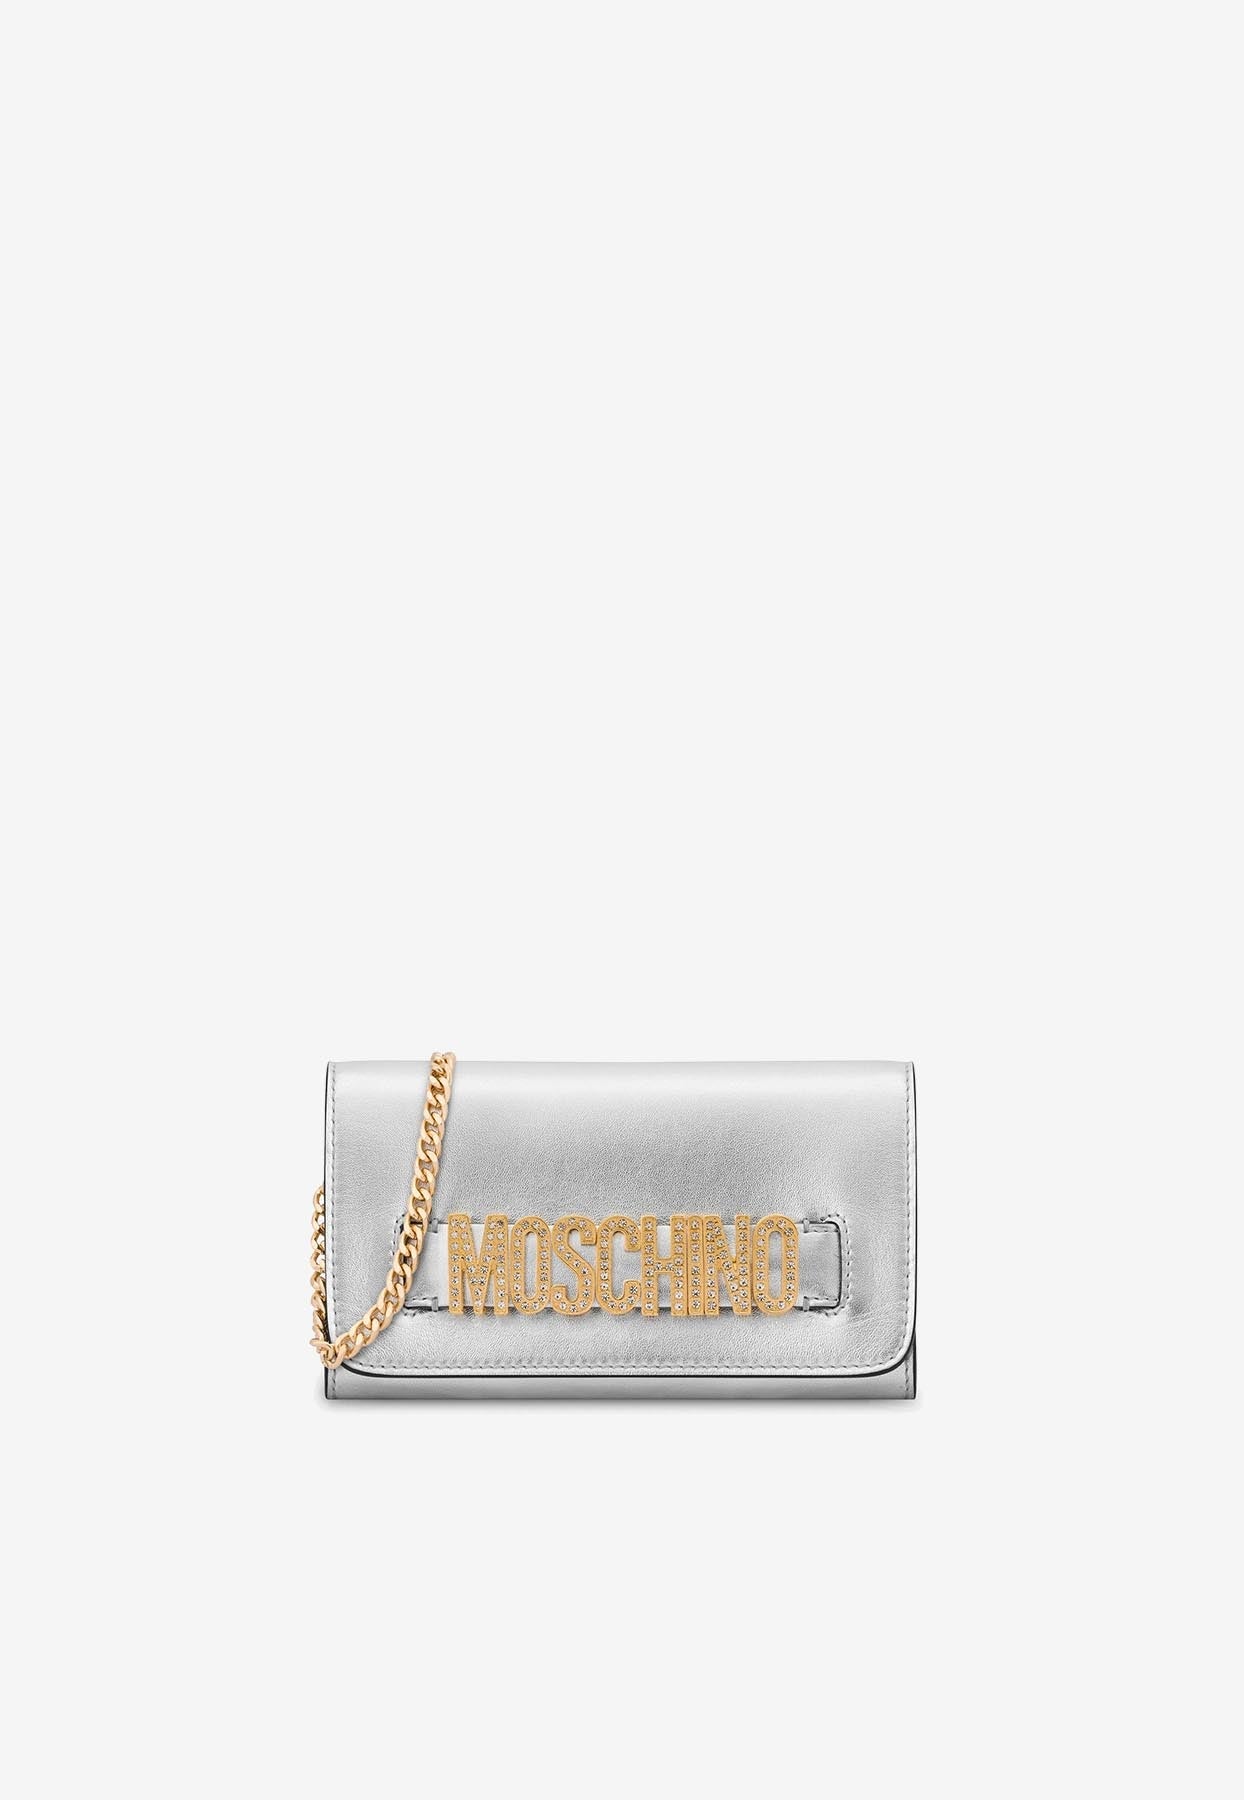 MOSCHINO CRYSTAL EMBELLISHED LOGO WALLET IN METALLIC NAPPA LEATHER,A8130 8011 1600